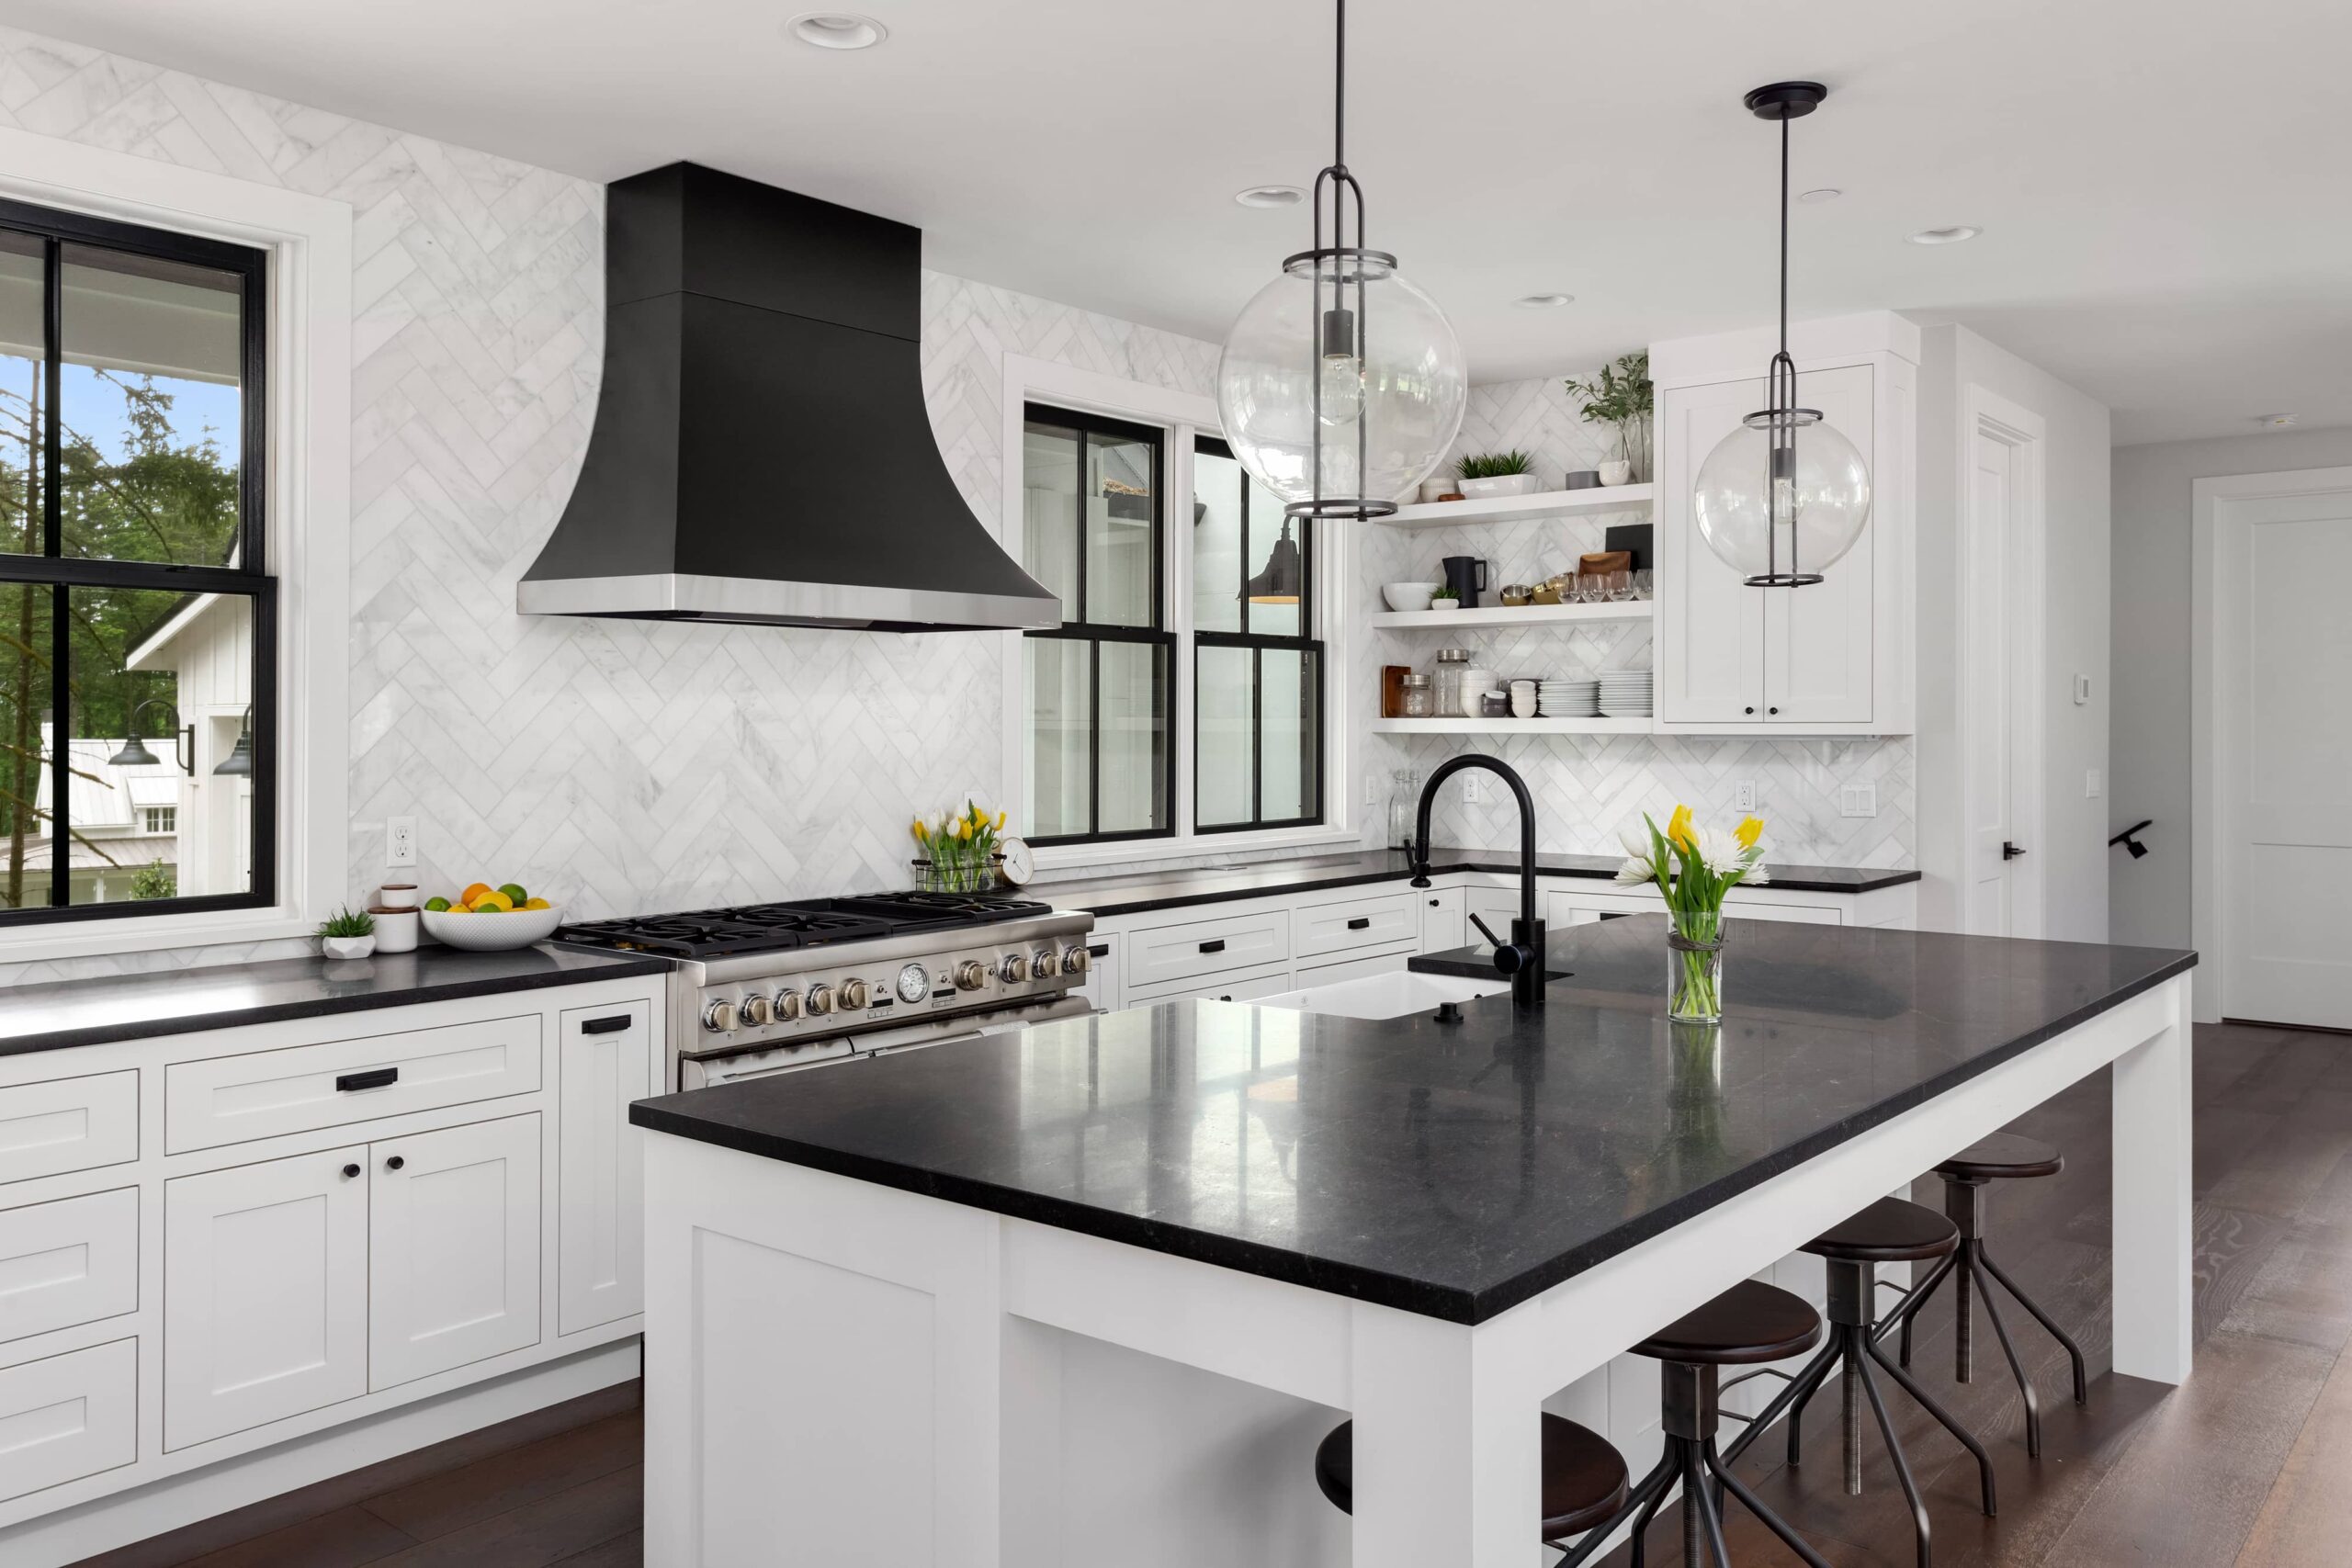 The Woodlands kitchen Remodeling Contractor